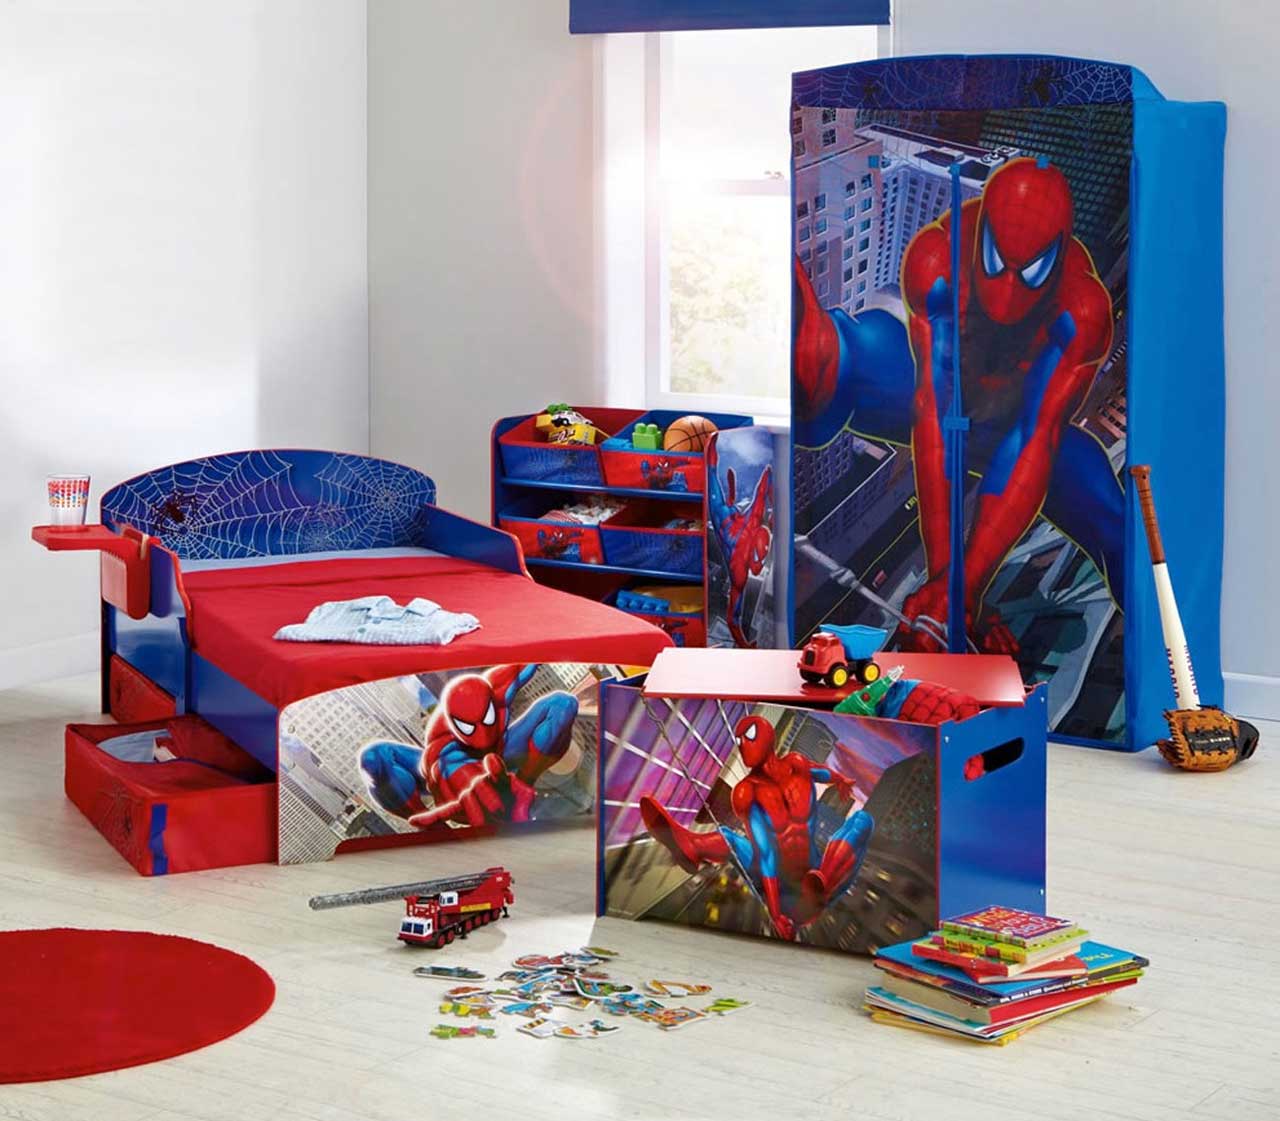 Amazing Kids Room Decor For Boys Spiderman Design Ideas Theme With Simple Bed Red And Blue Color Scheme Kids Room Decor Also Cool Cupboard Kids Room Design